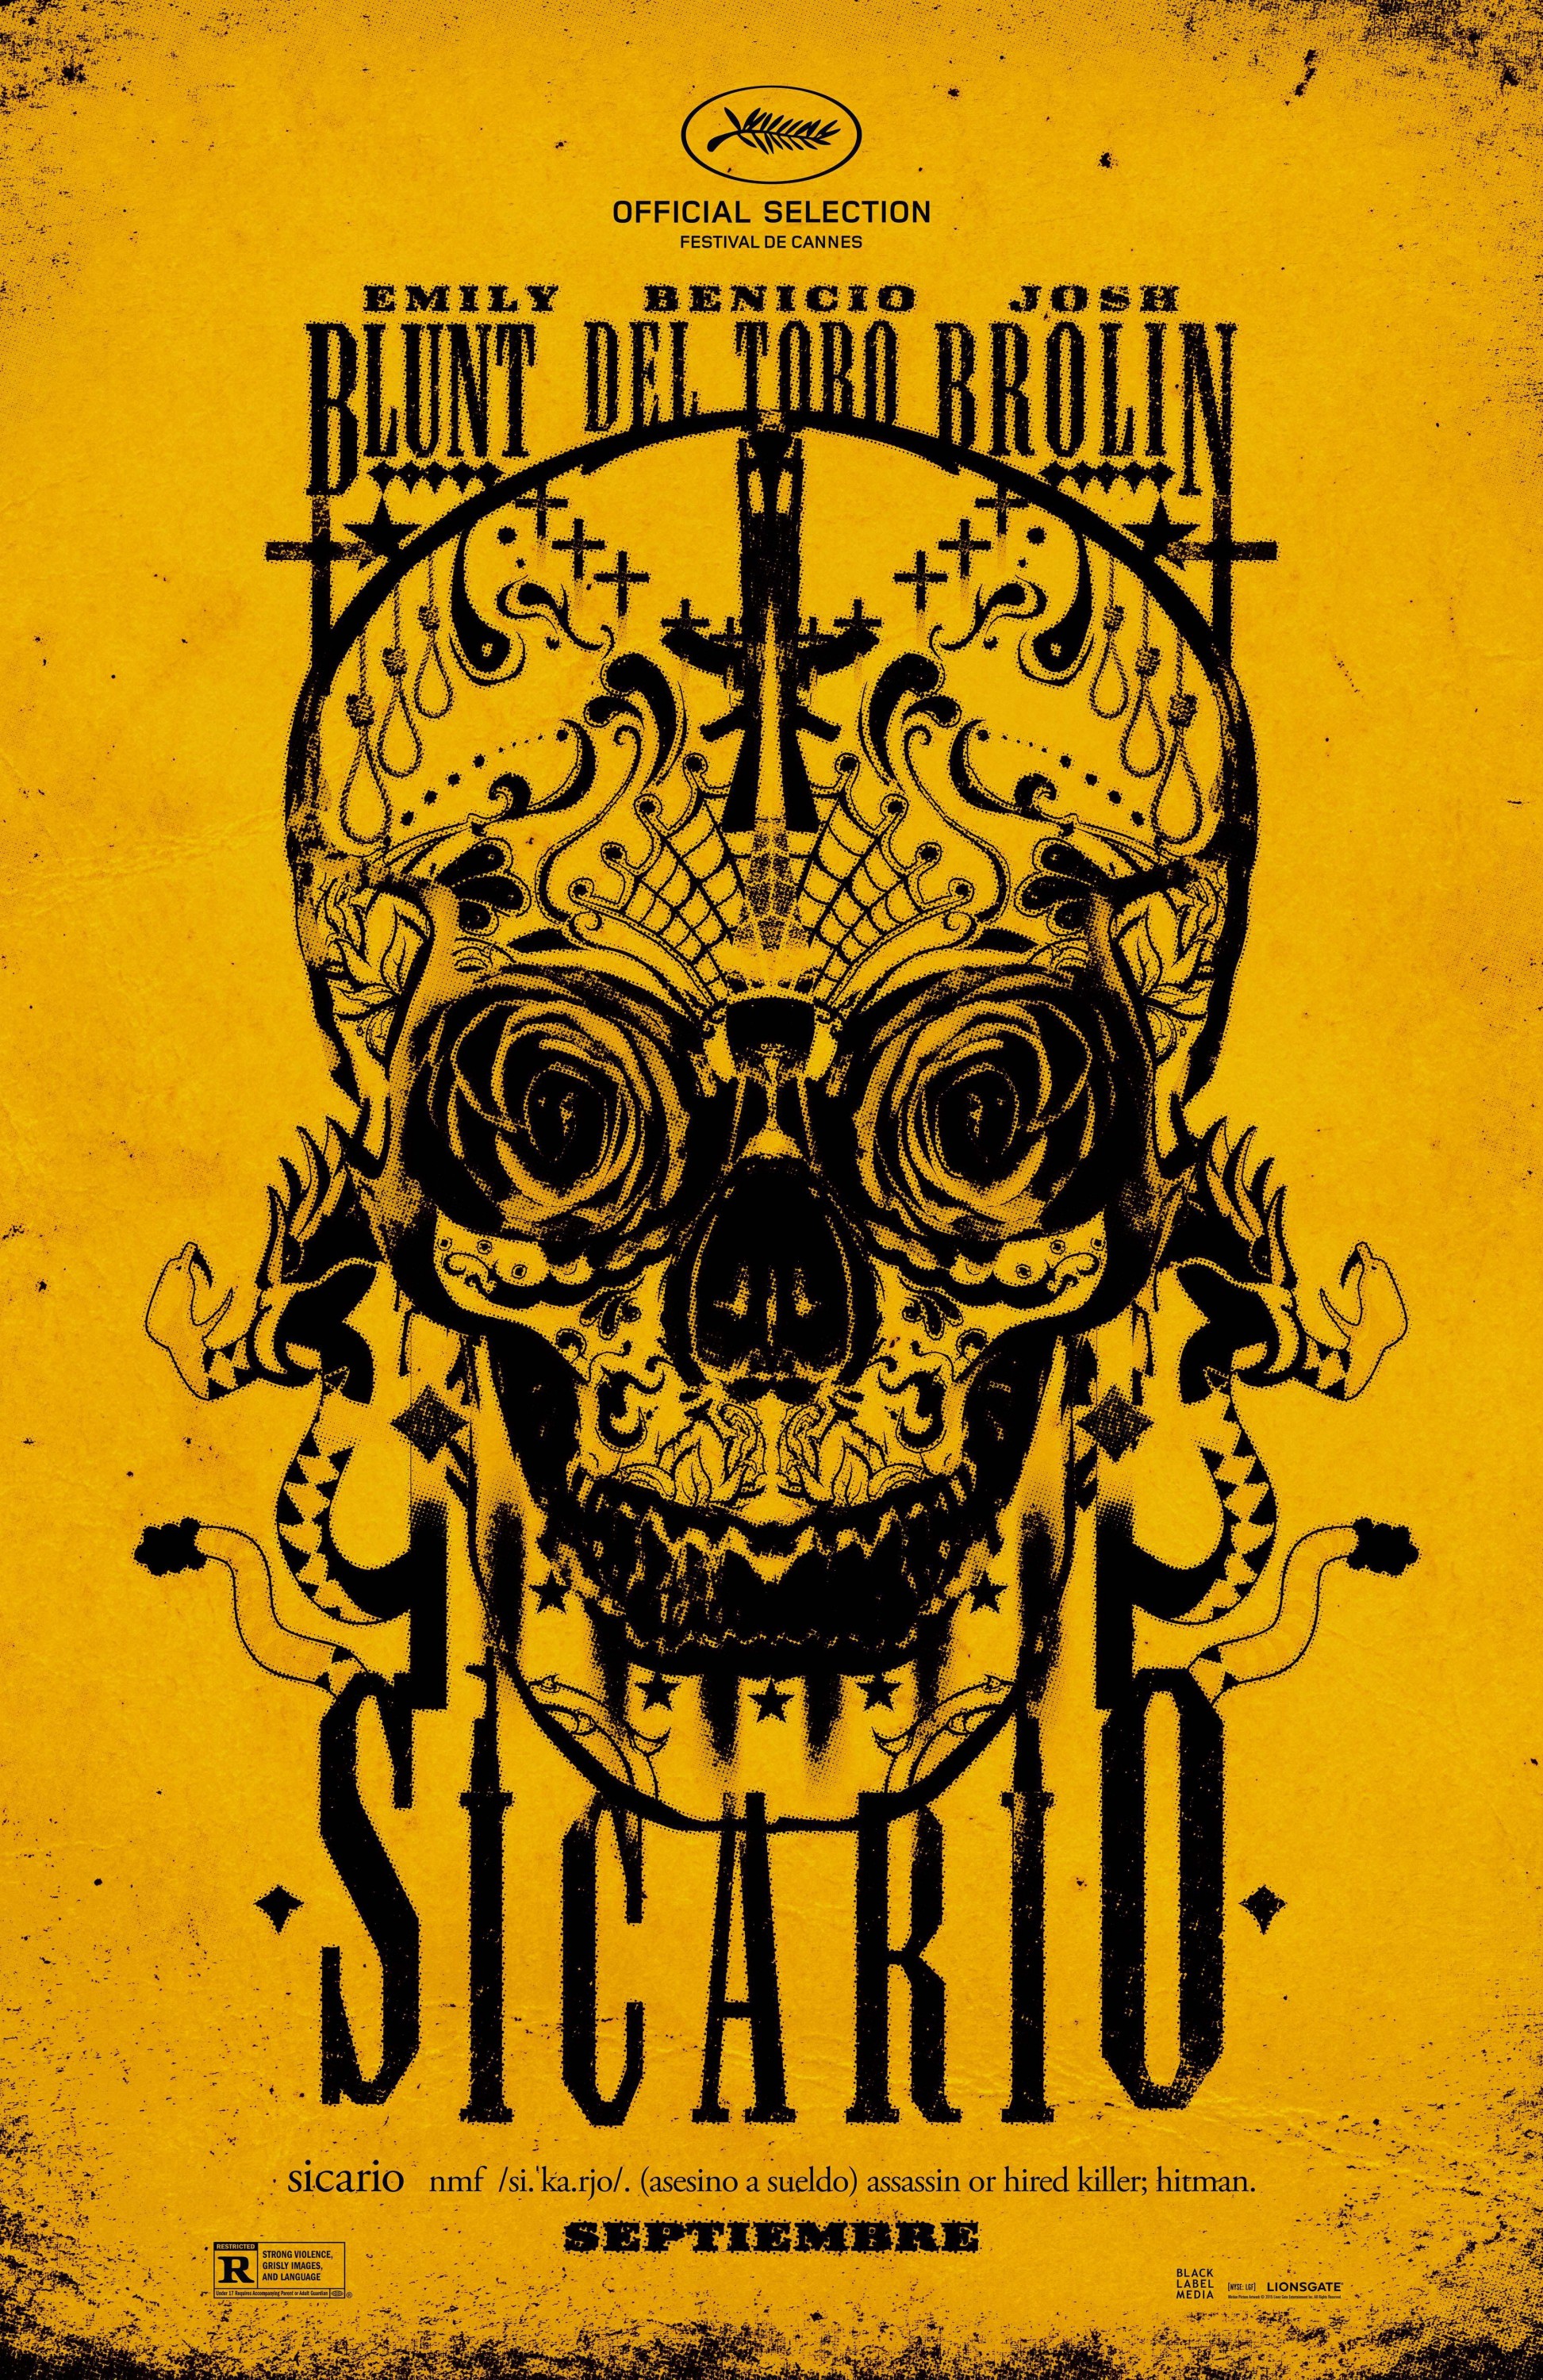 Mega Sized Movie Poster Image for Sicario (#2 of 13)